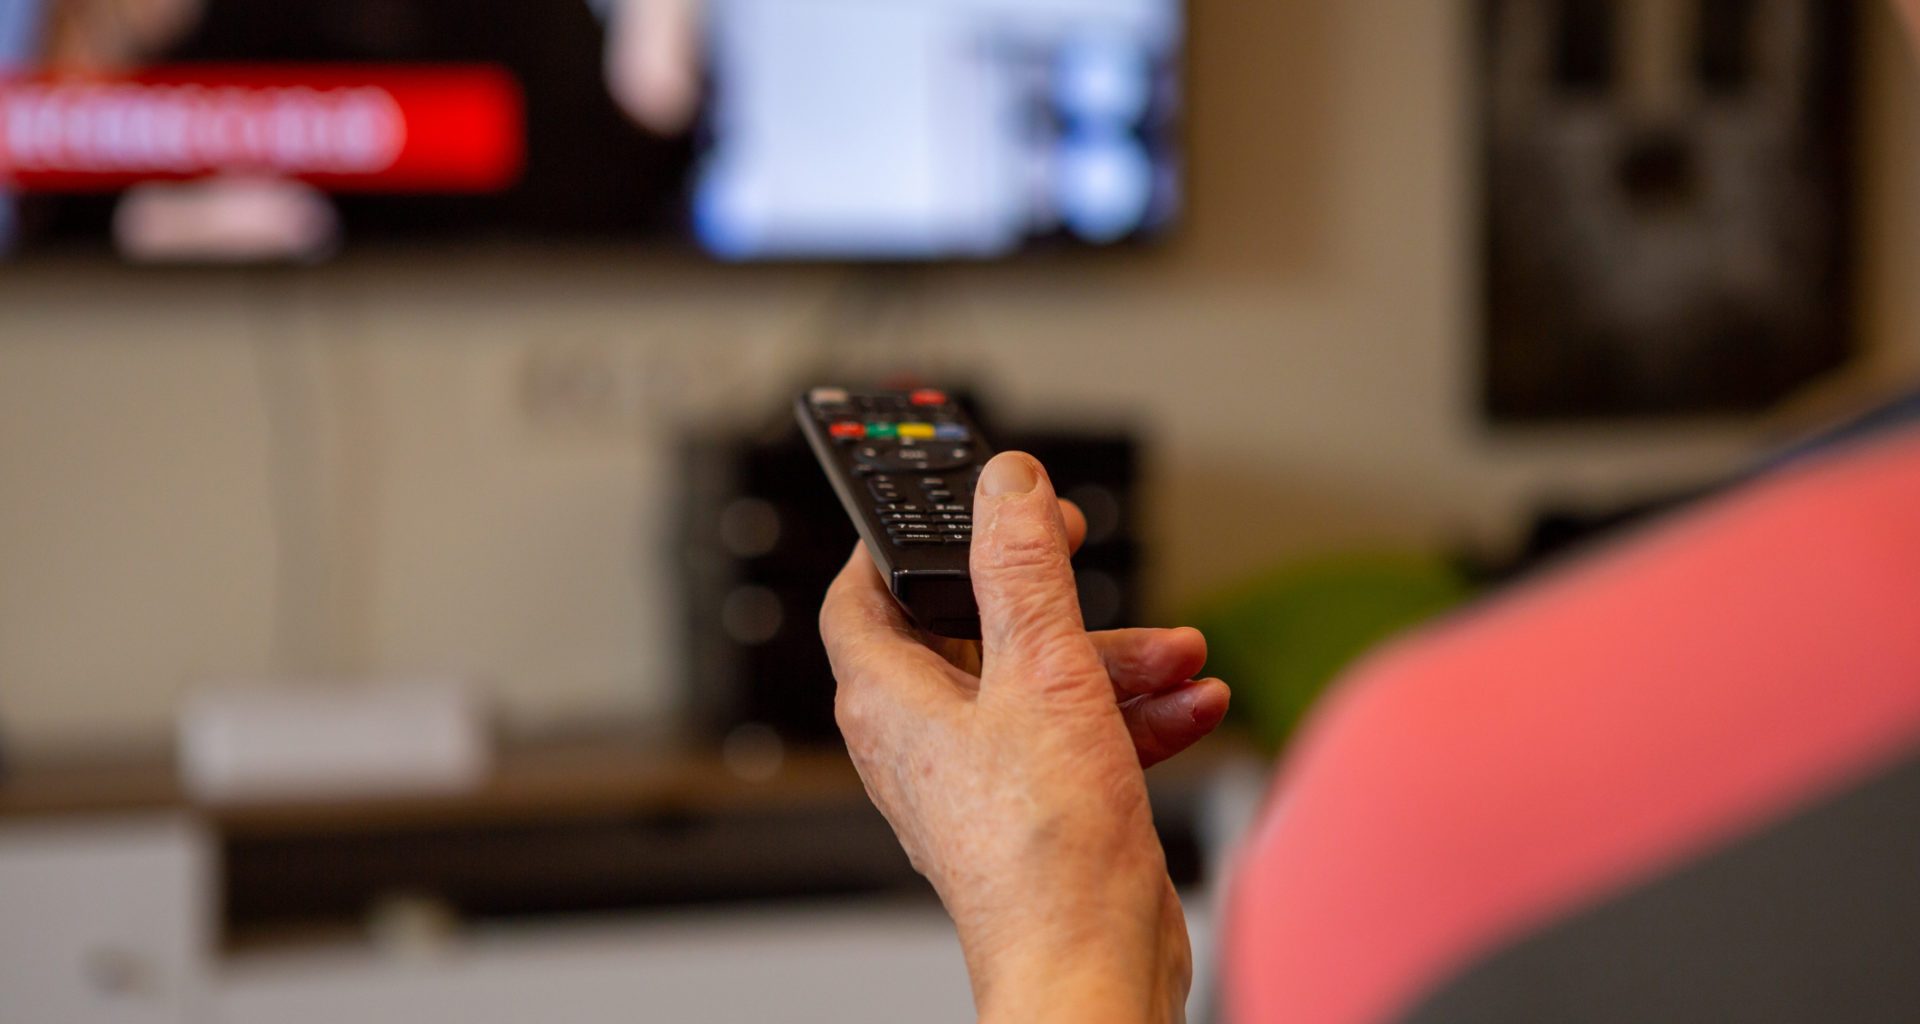 Claim Scotland has "lowest amount" of TV licence payment is Unsupported 6